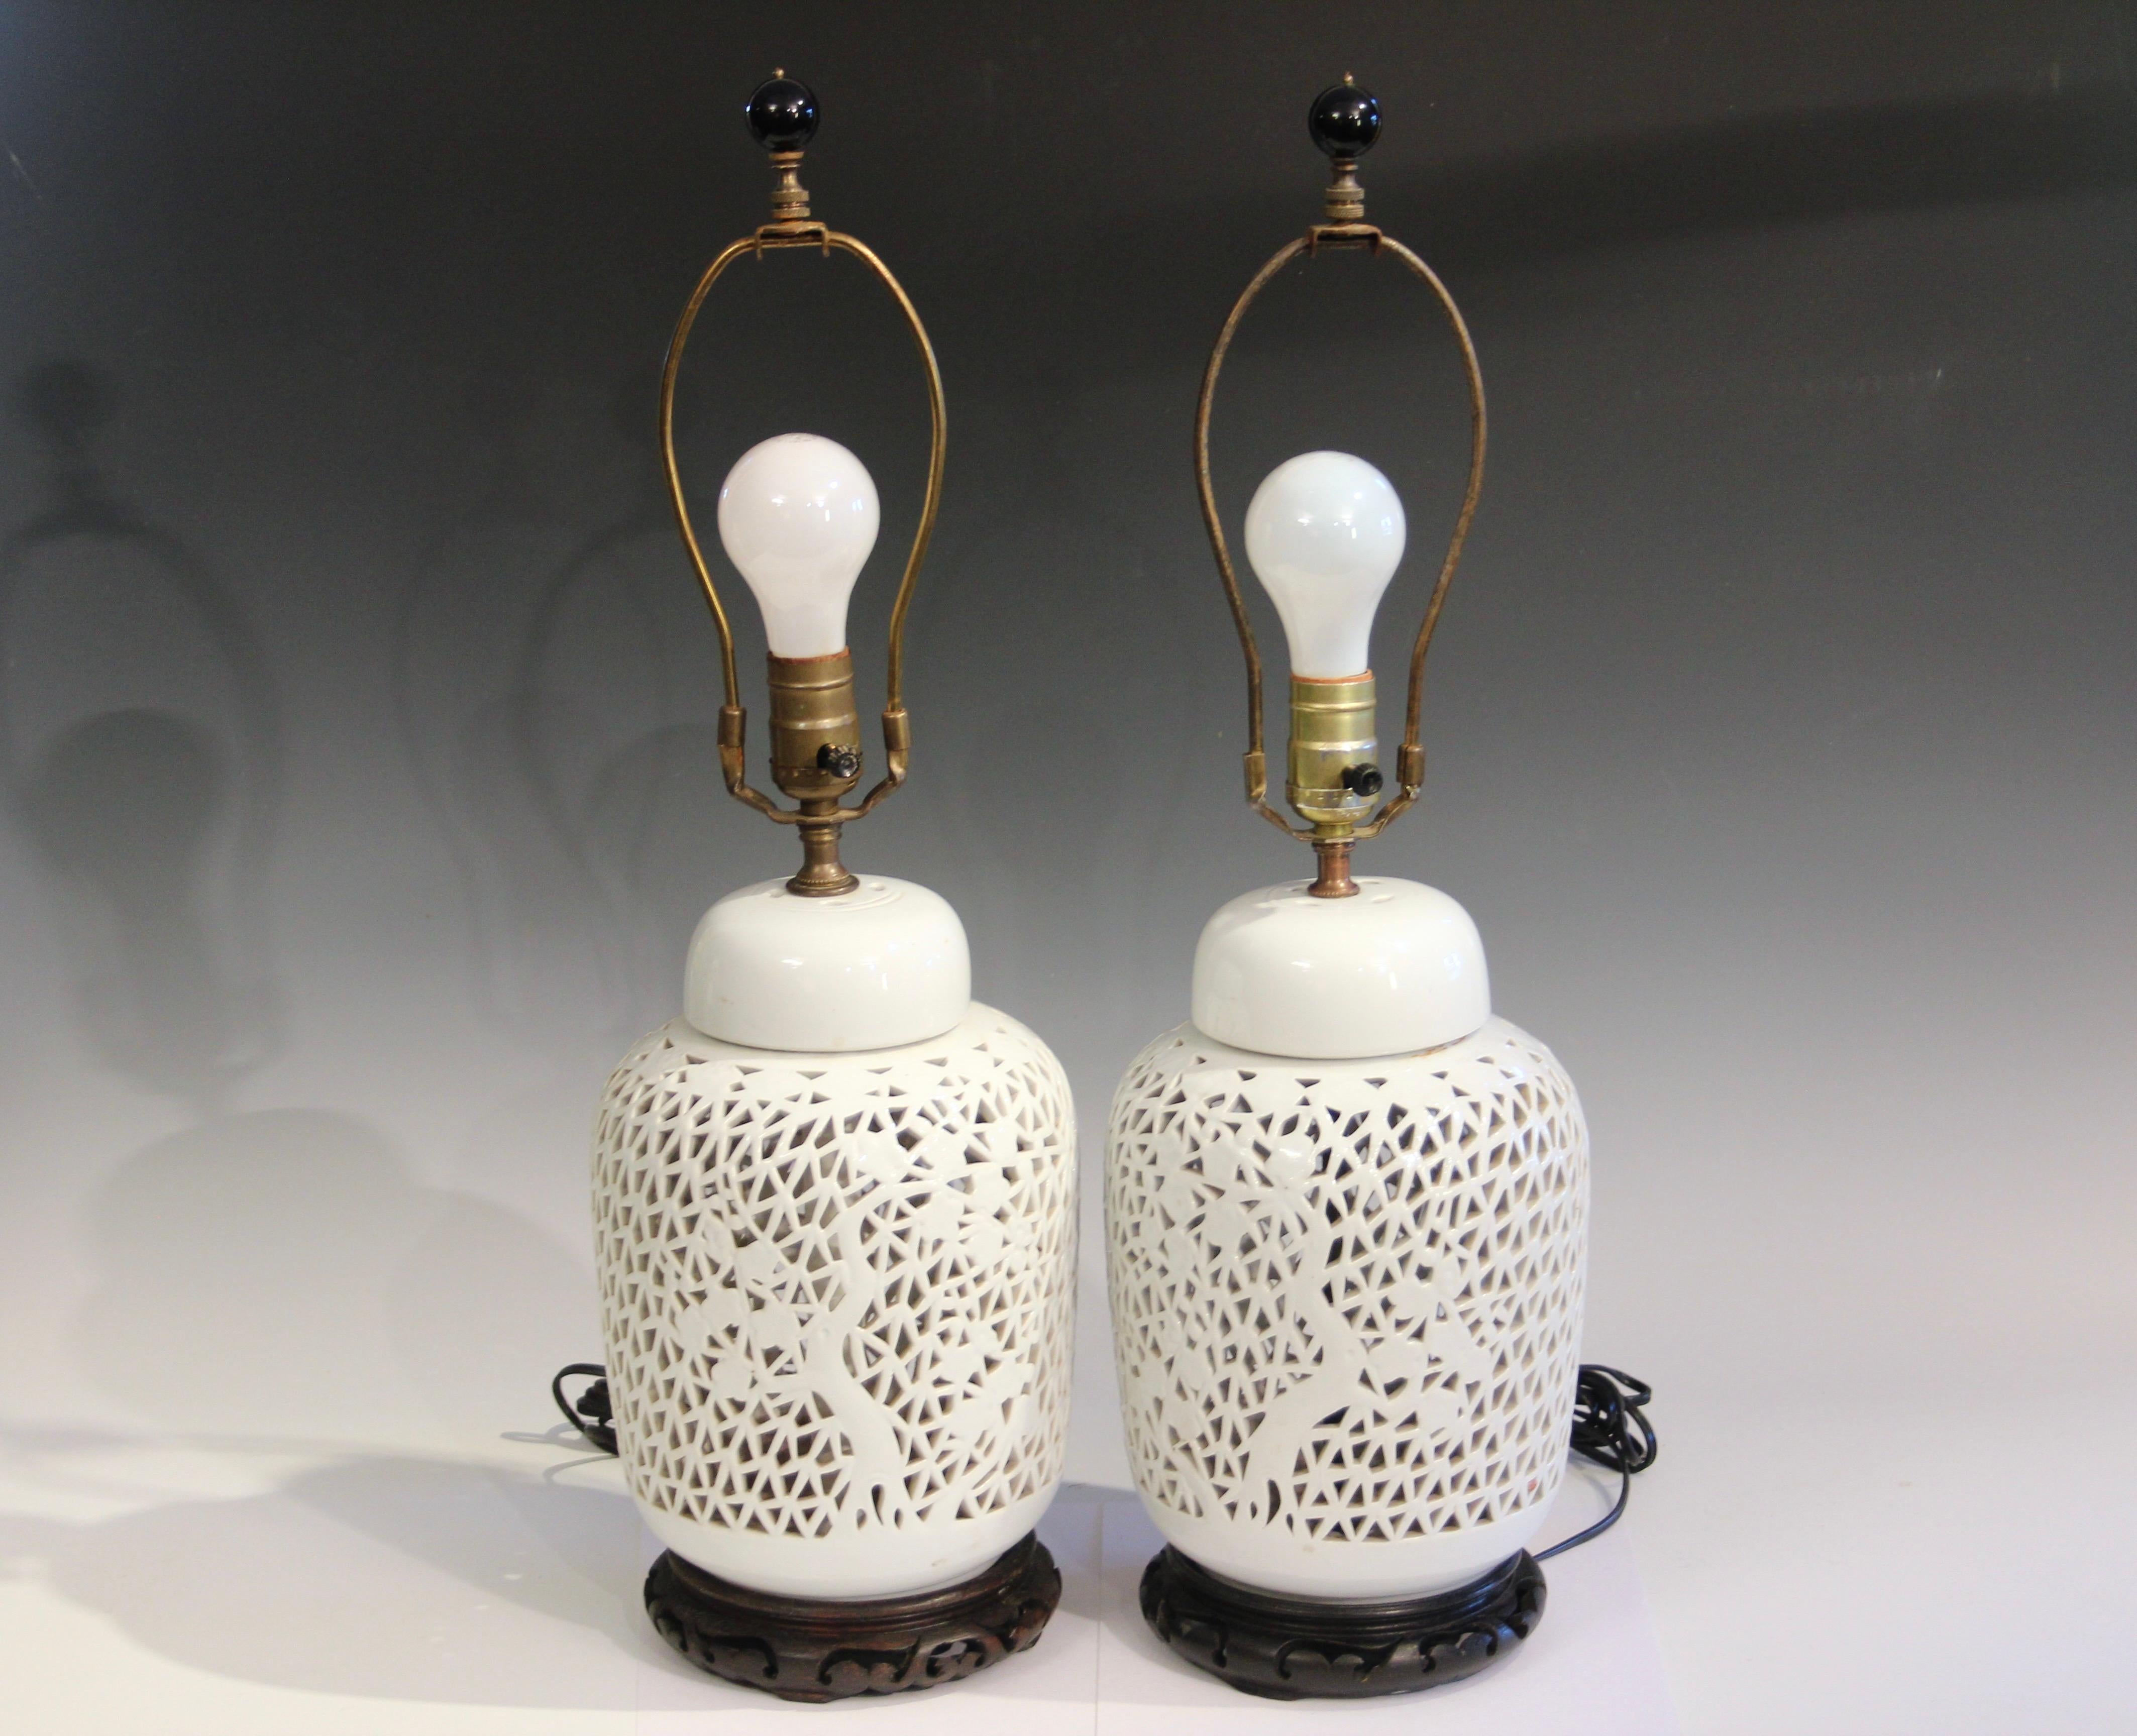 Pair old vintage Chinese porcelain reticulated white lamps, circa early/mid 20th century. Hand carved design of trees. 3-way switches. Shades not included. Excellent condition, new wiring, as shown. 25